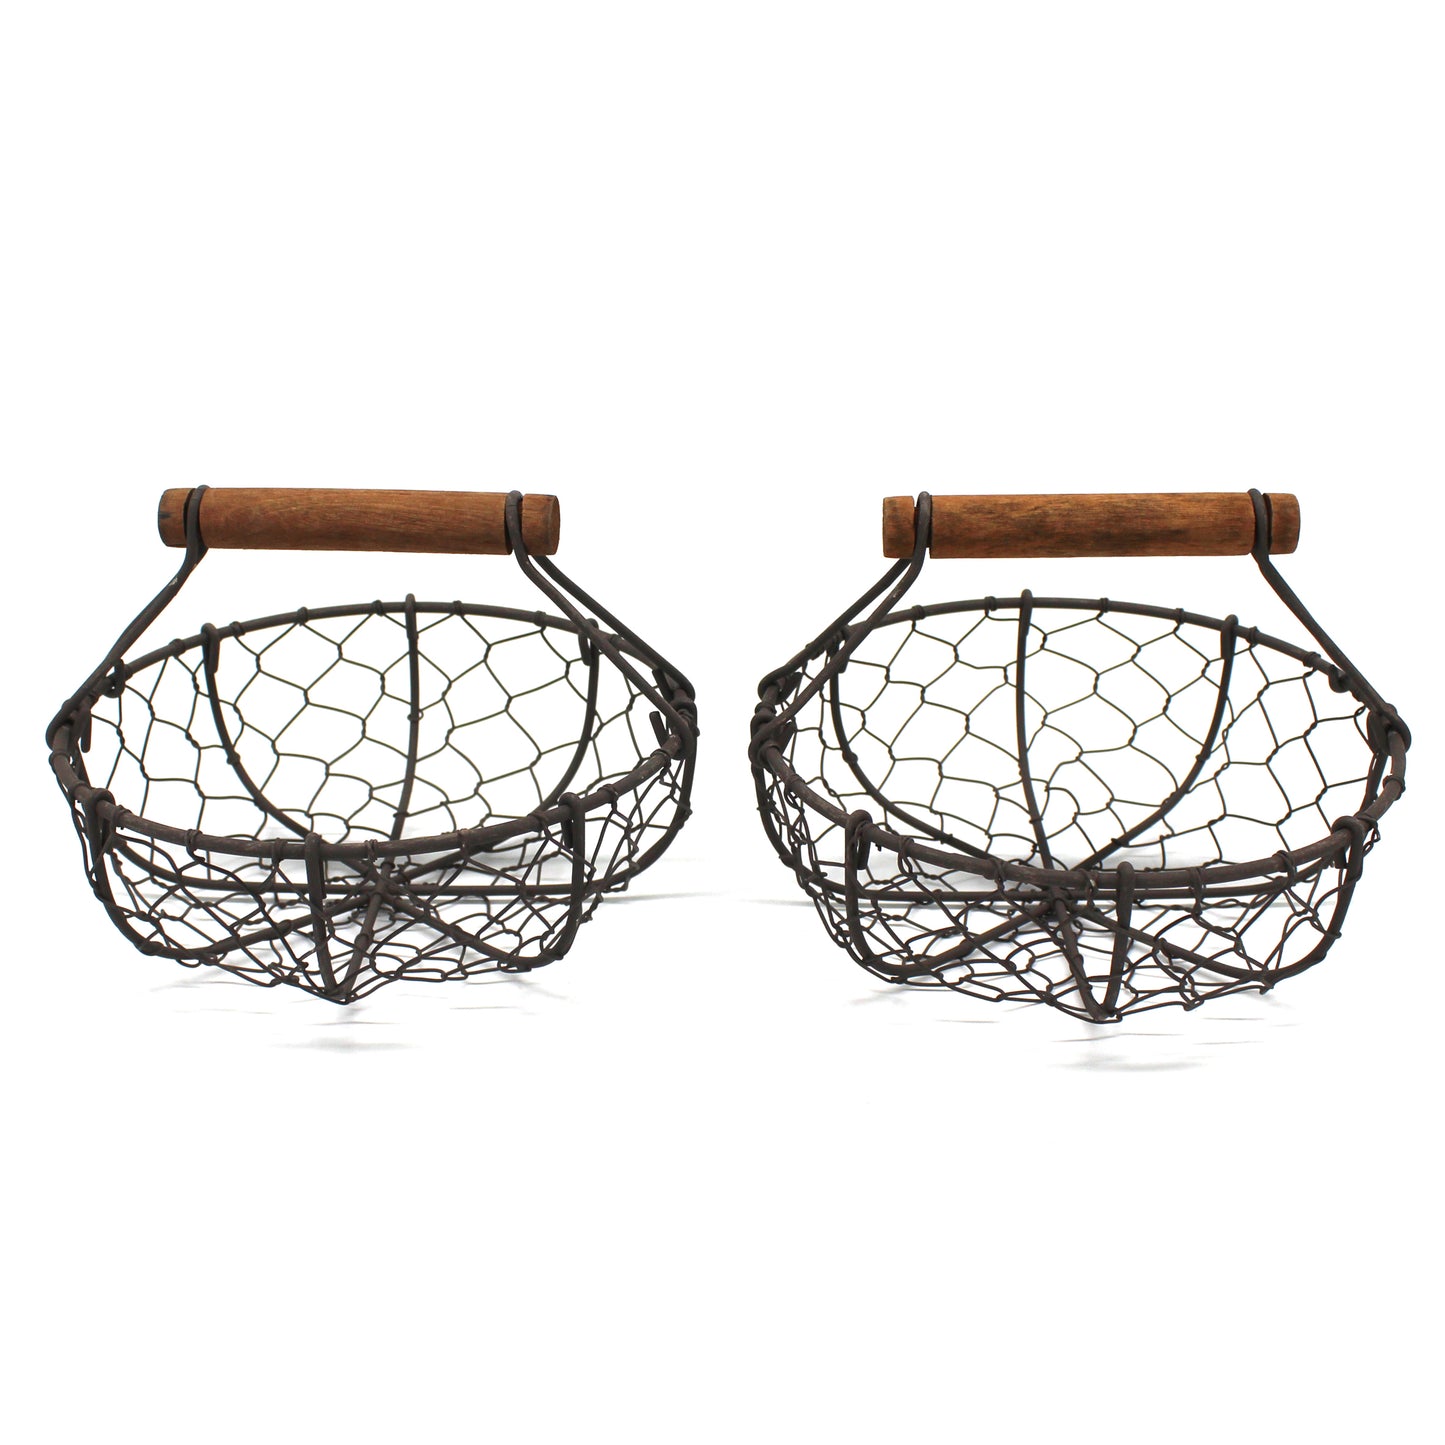 CVHOMEDECO. Round Chicken Wire Egg Baskets Rust Gathering Baskets with Wooden Handle Country Vintage Style Storage Baskets. Set of 2